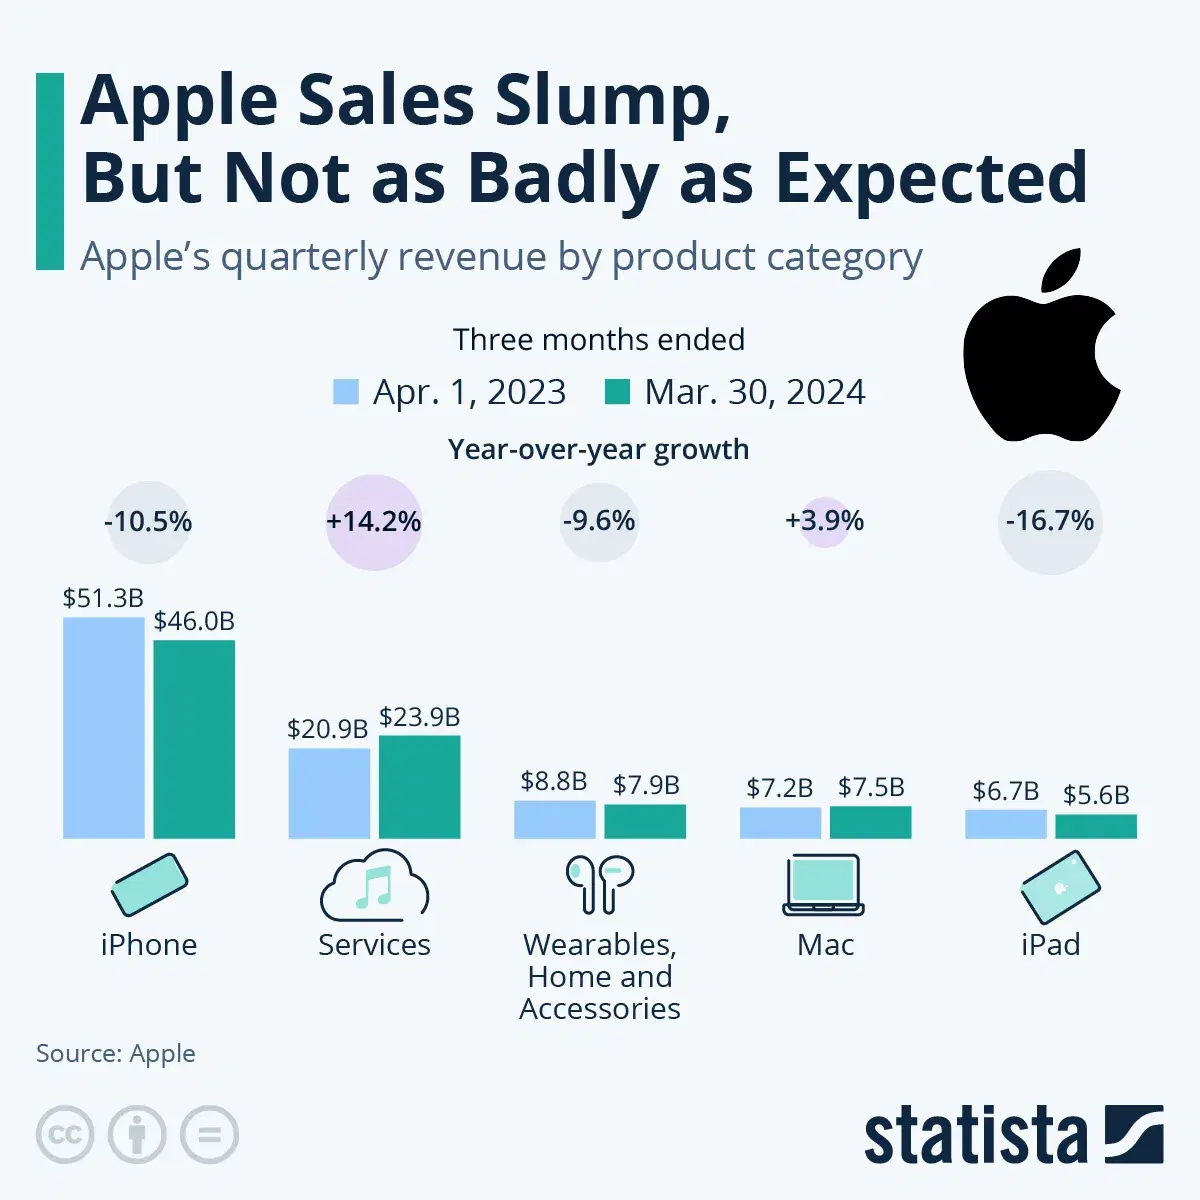 Apple Sales Slump, But Not as Badly as Expected